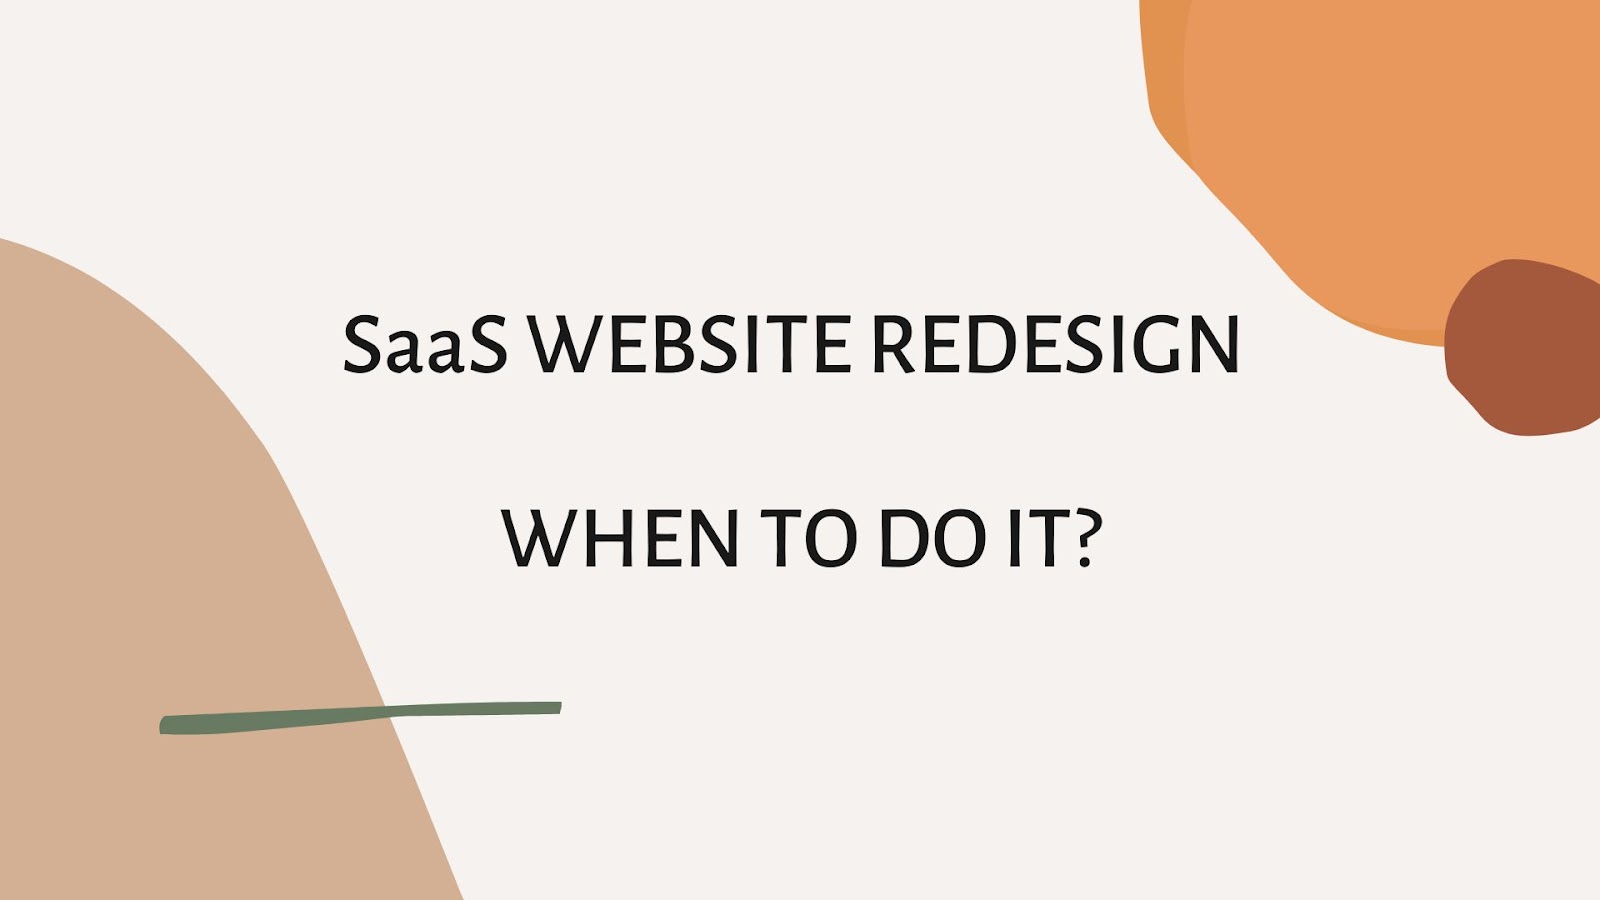 SaaS website redesign: when to do it?